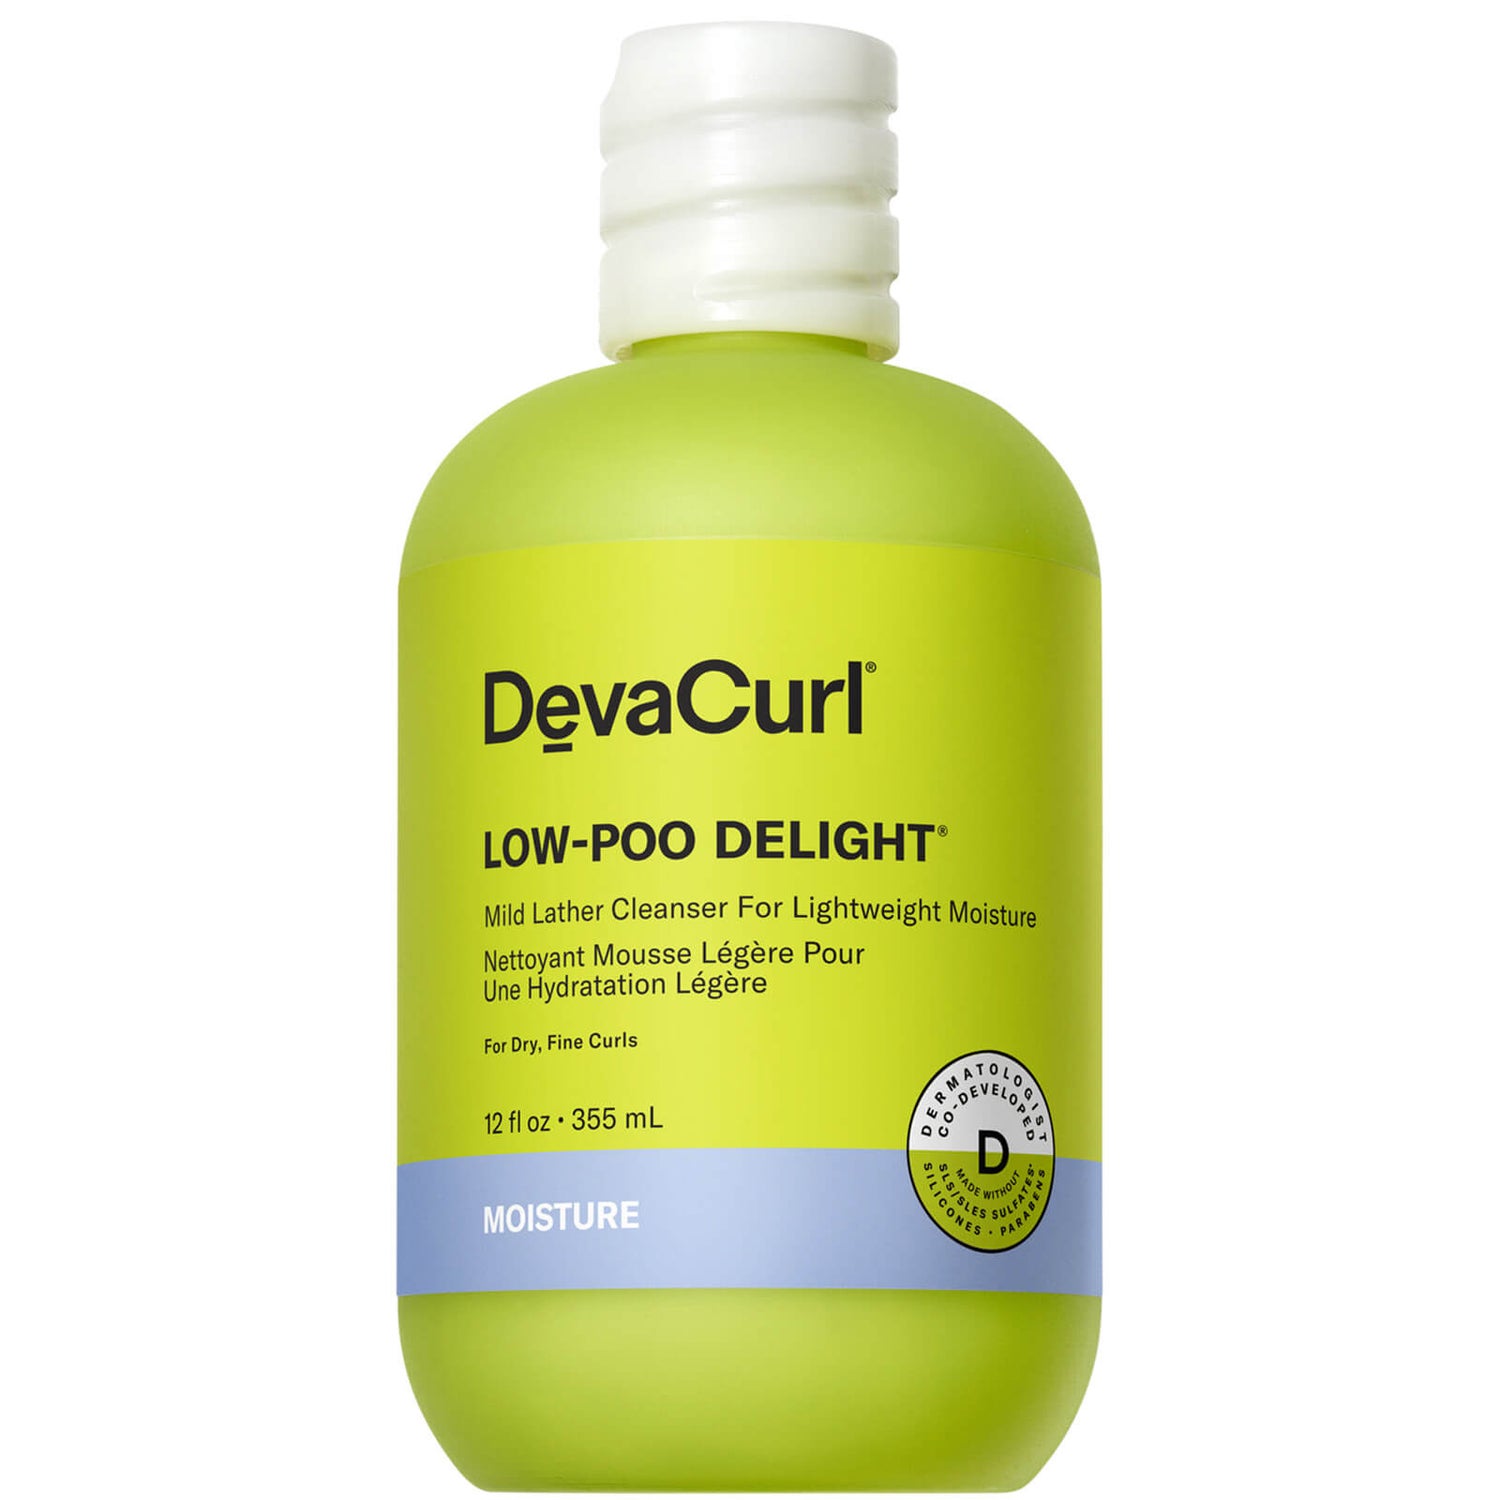 DevaCurl Low-Poo Delight Mild Lather Cleanser for Lightweight Moisture (Various Sizes)